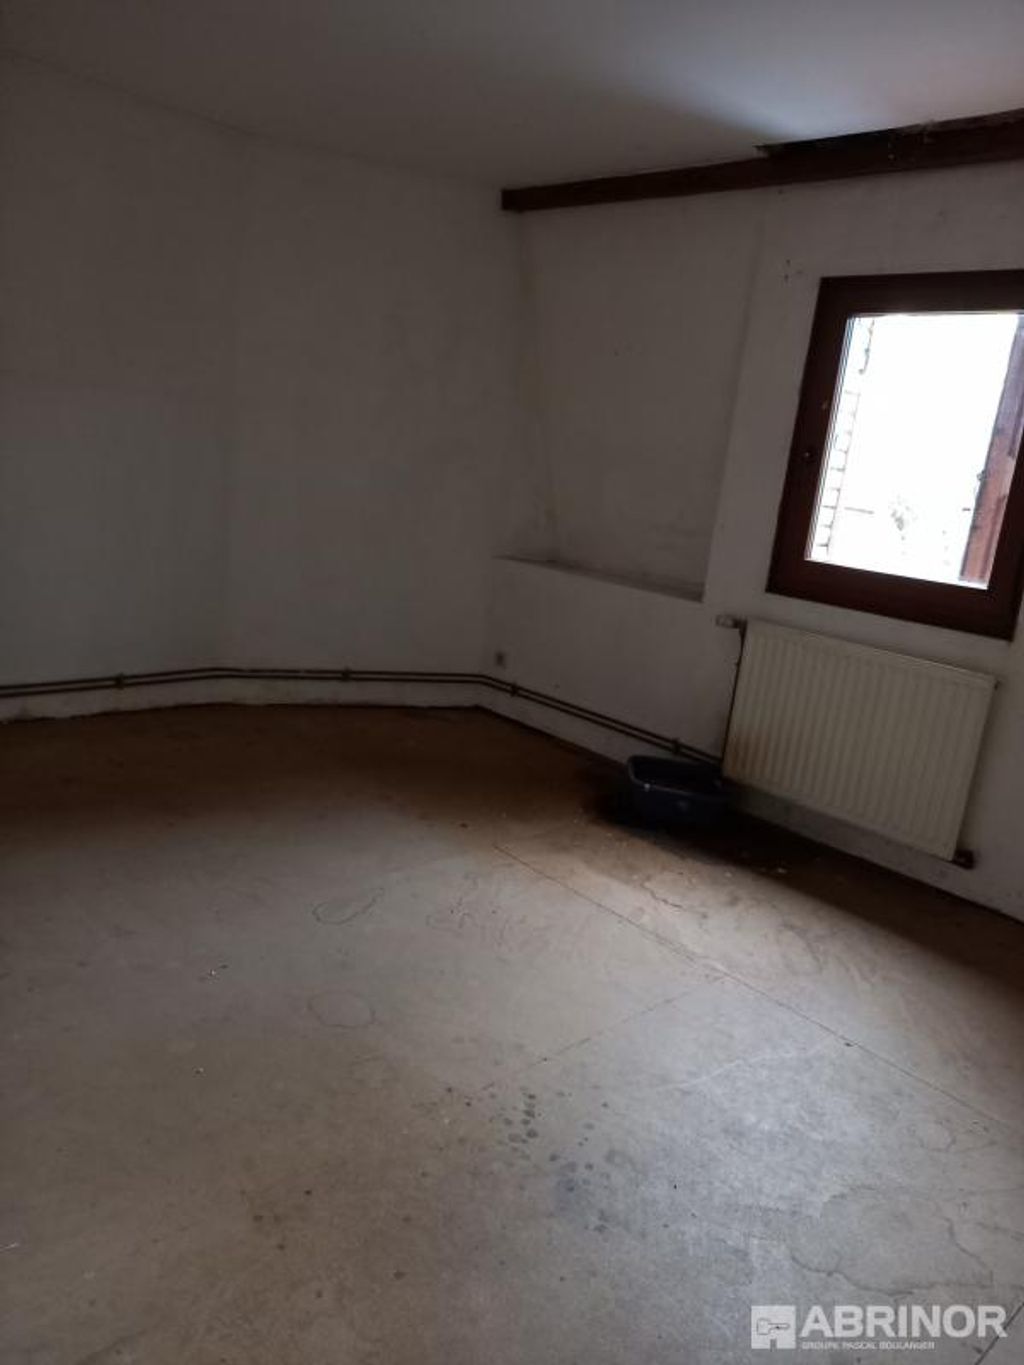 Achat maison 3 chambre(s) - Rieulay